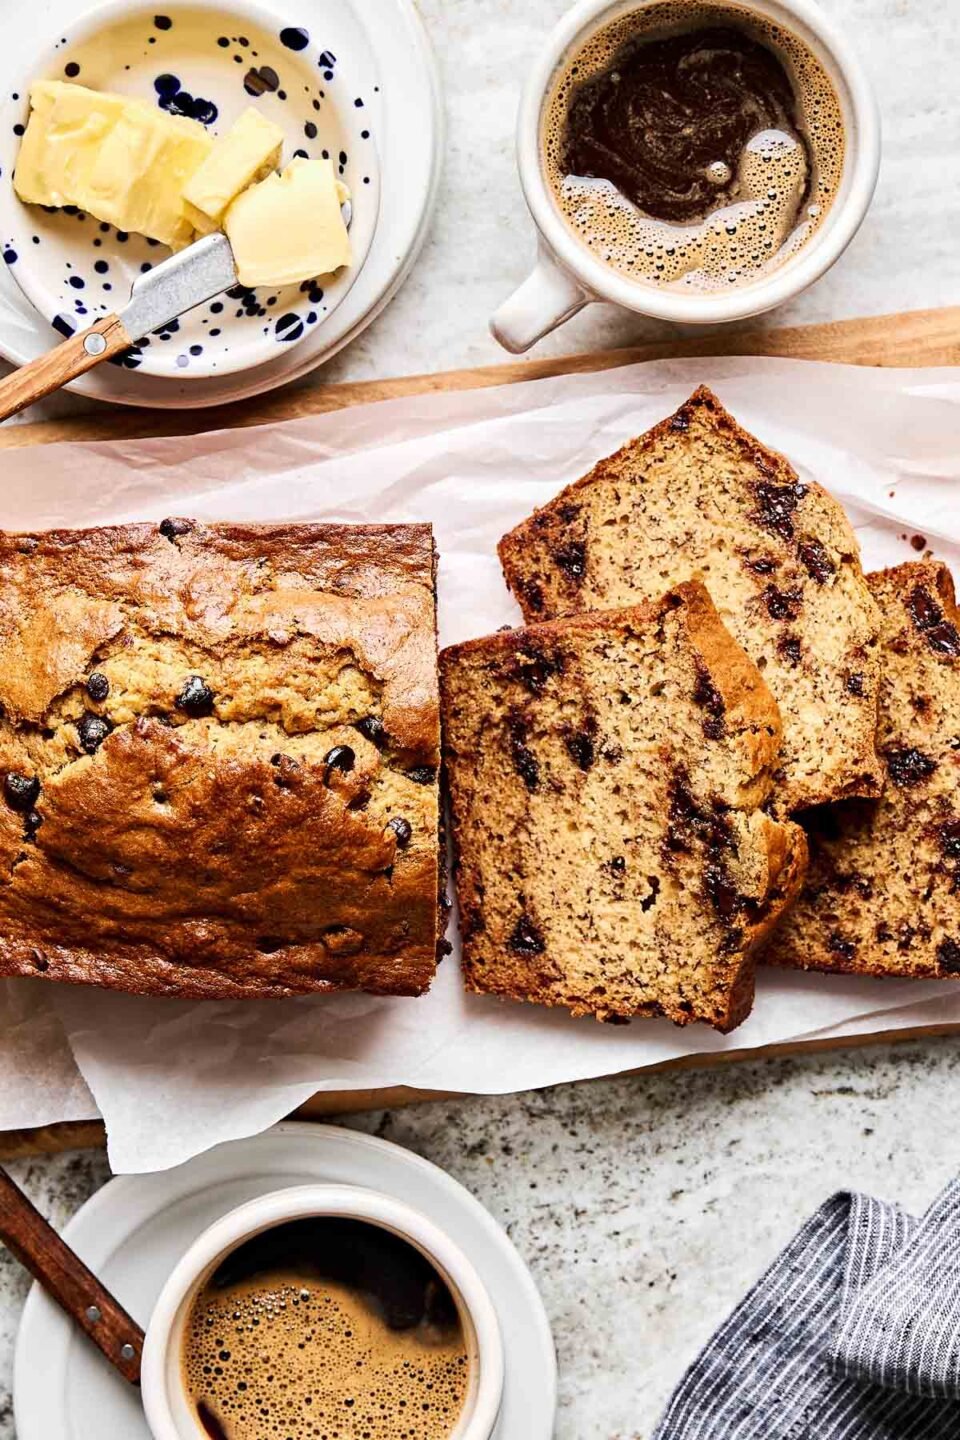 An overhead shot of 4 slices of chocolate chip banana bread and the remaining unsliced loaf on white parchment paper atop a wooden board. A dish of butter and two cups of coffee sit alongside the loaf of bread.